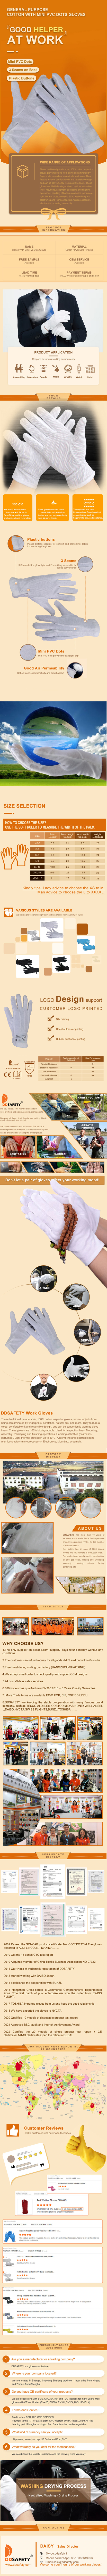 Bleach Beaded Parade Cotton Gloves with PVC Dotted Grip, Plastic Buckle - DCH116 Bleach Beaded Parade Cotton Gloves with PVC Dotted Grip, Plastic Buckle - DCH116 gloves,cotton gloves,Bleach Cotton Gloves,dotted gloves